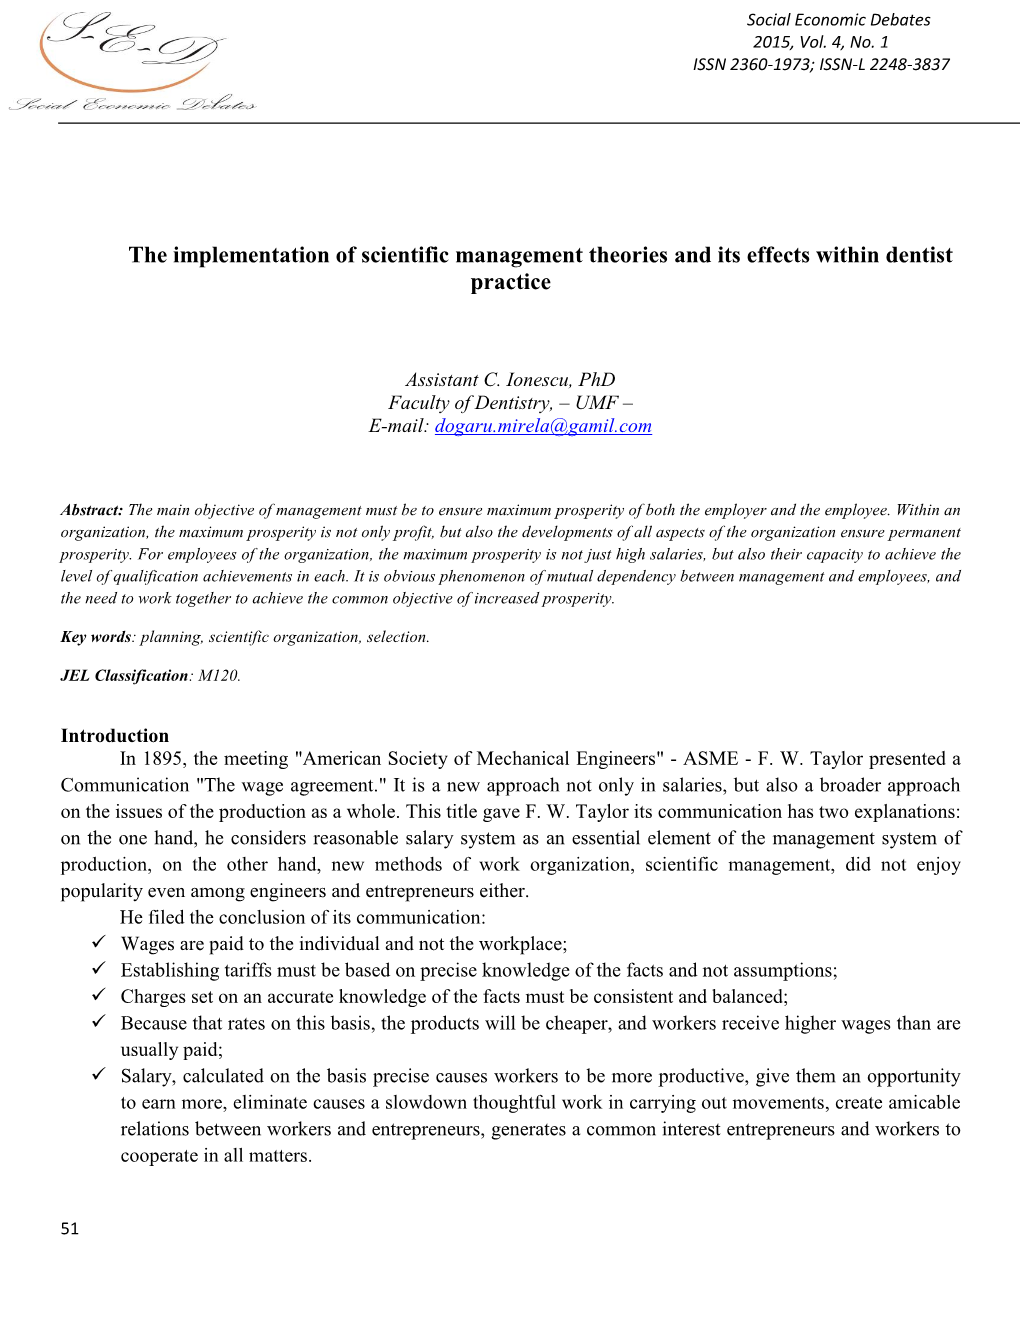 The Implementation of Scientific Management Theories and Its Effects Within Dentist Practice